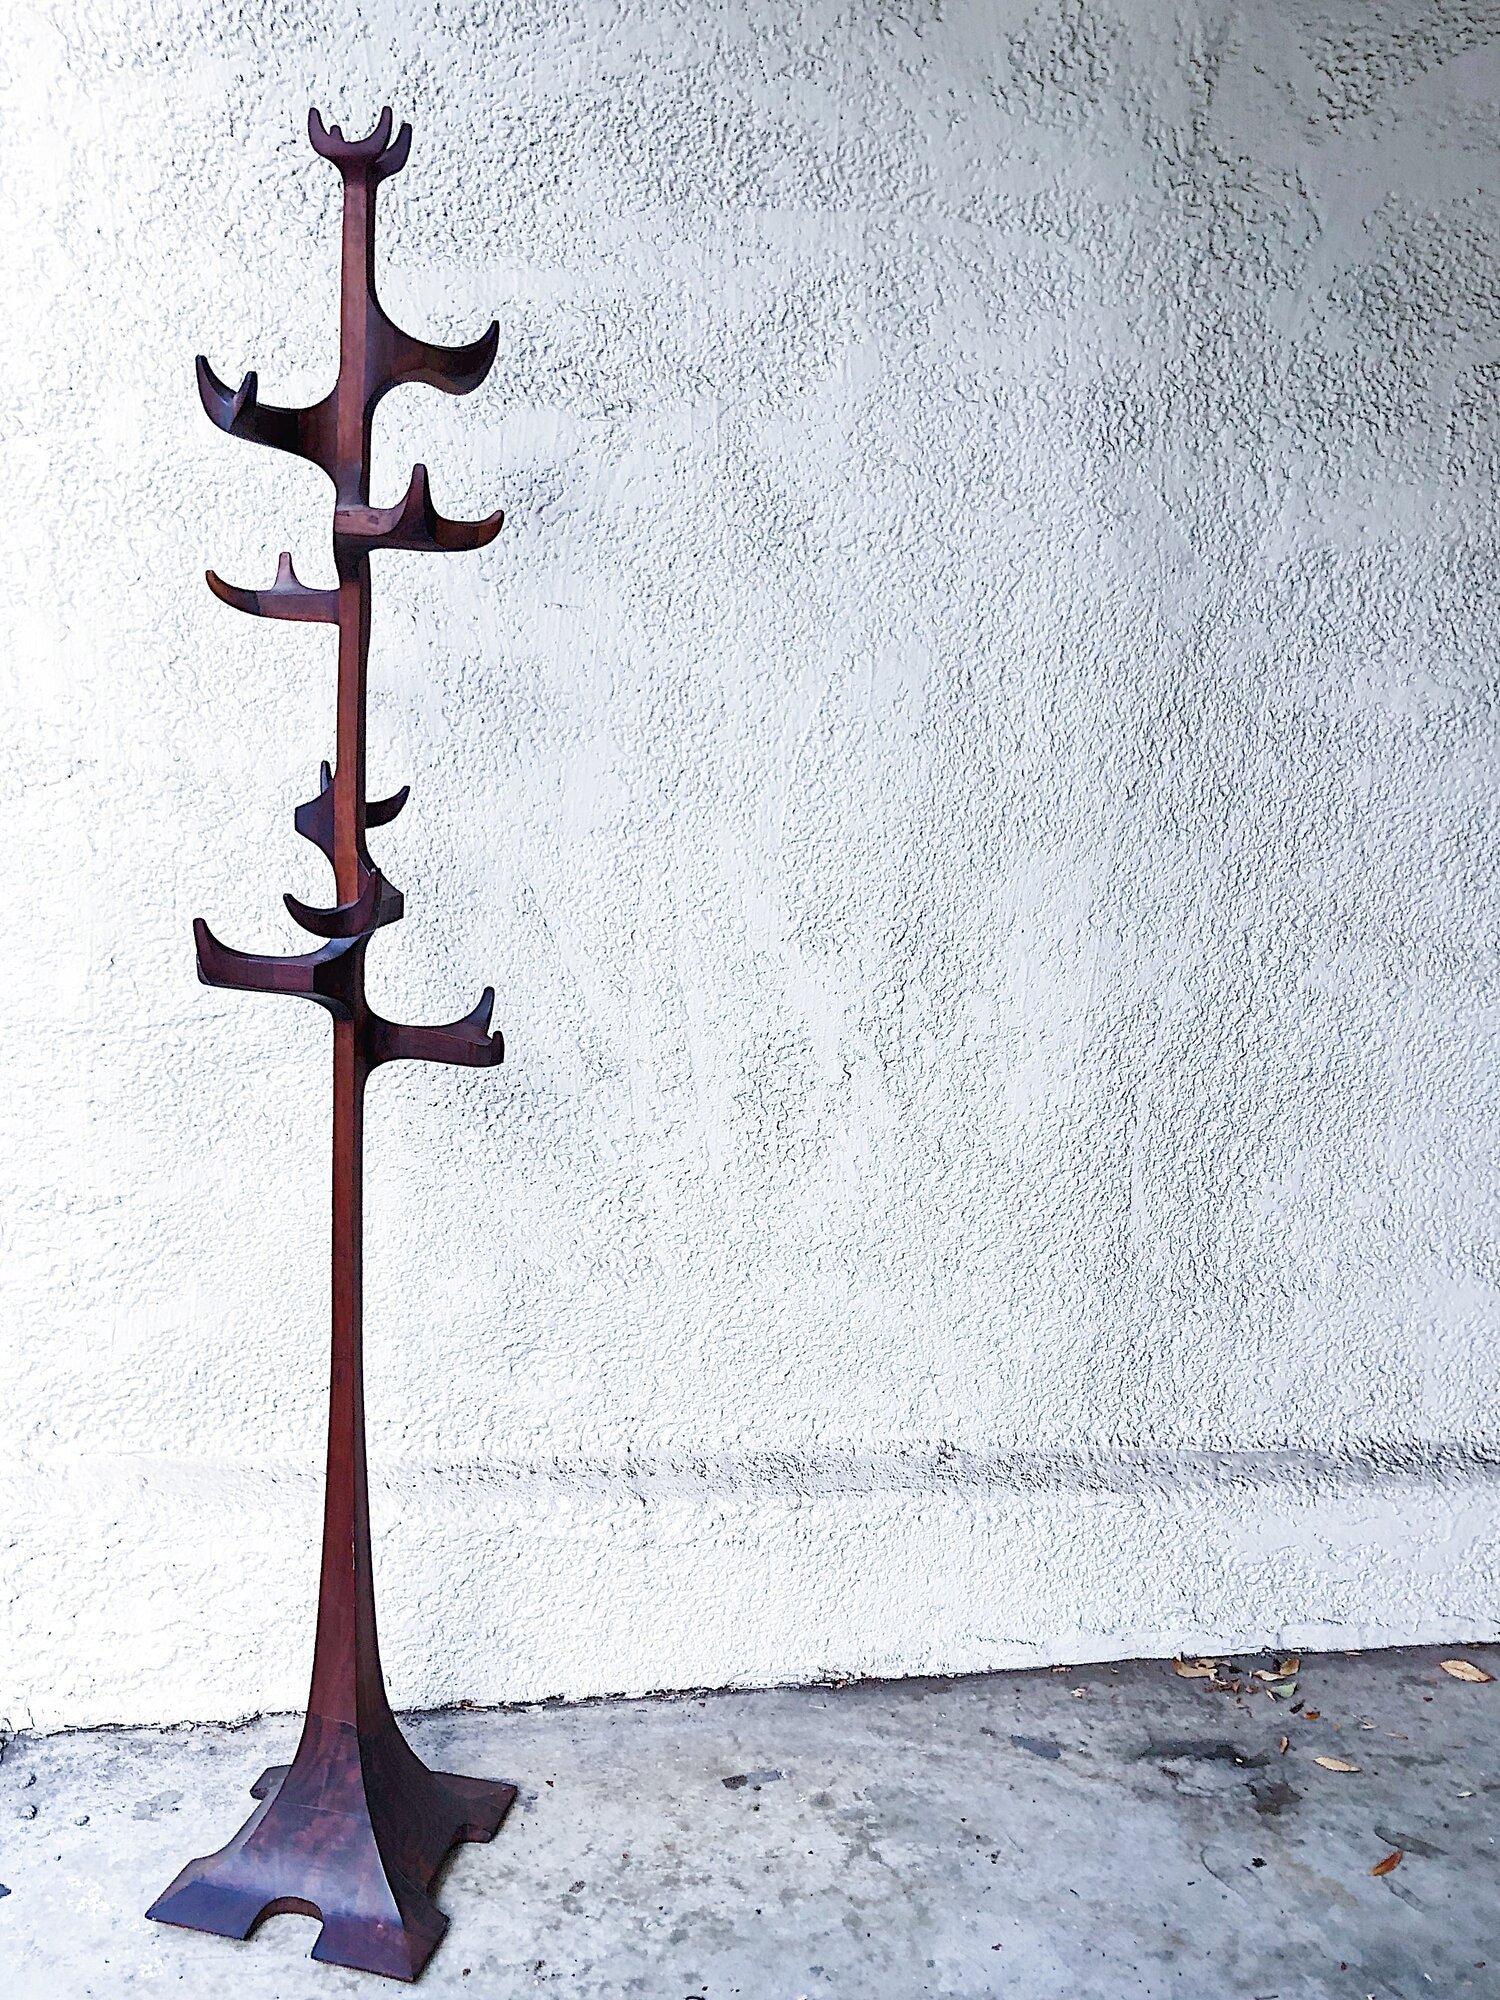 A Mid-Century Modern sculptural coat rack/ hat tree designed by Edward G. Livingston for Archotypo studio, c. 1960s. Handcrafted in solid walnut, “Archotypo LXIX” impressed under the base.  This modern art coat rack is constructed from a series of